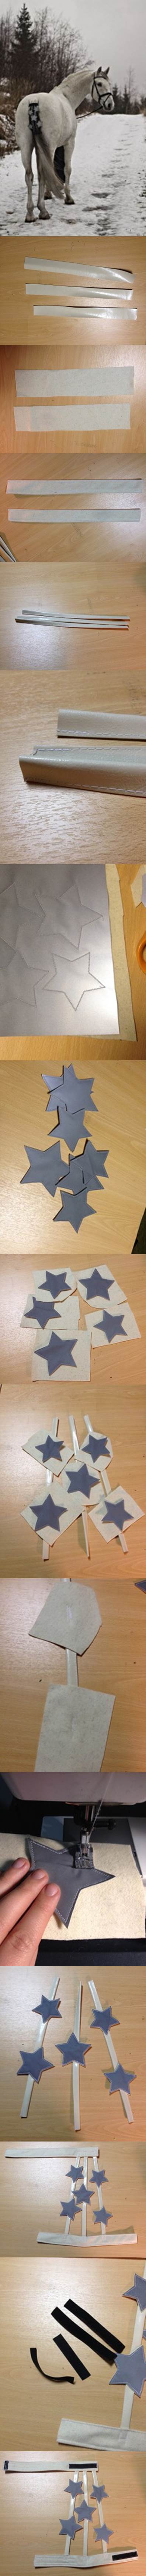 DIY reflective fabric stars tail adornment for horses step by step tutorial instructions 2